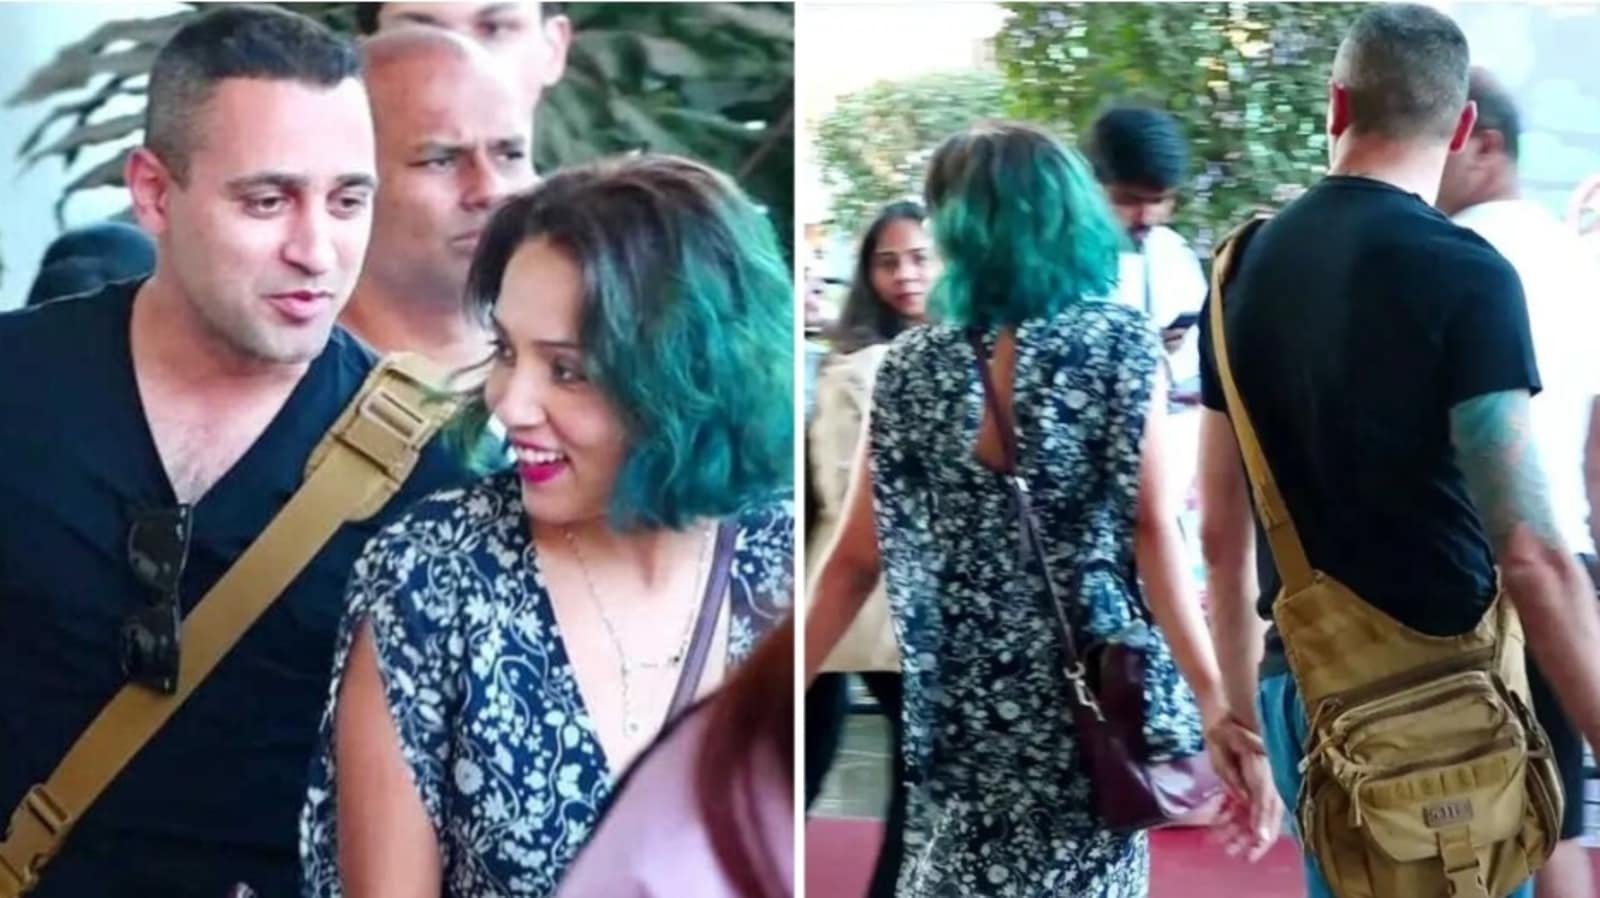 Imran Khan spotted hand in hand with rumoured girlfriend Lekha Washington during rare public appearance. Watch